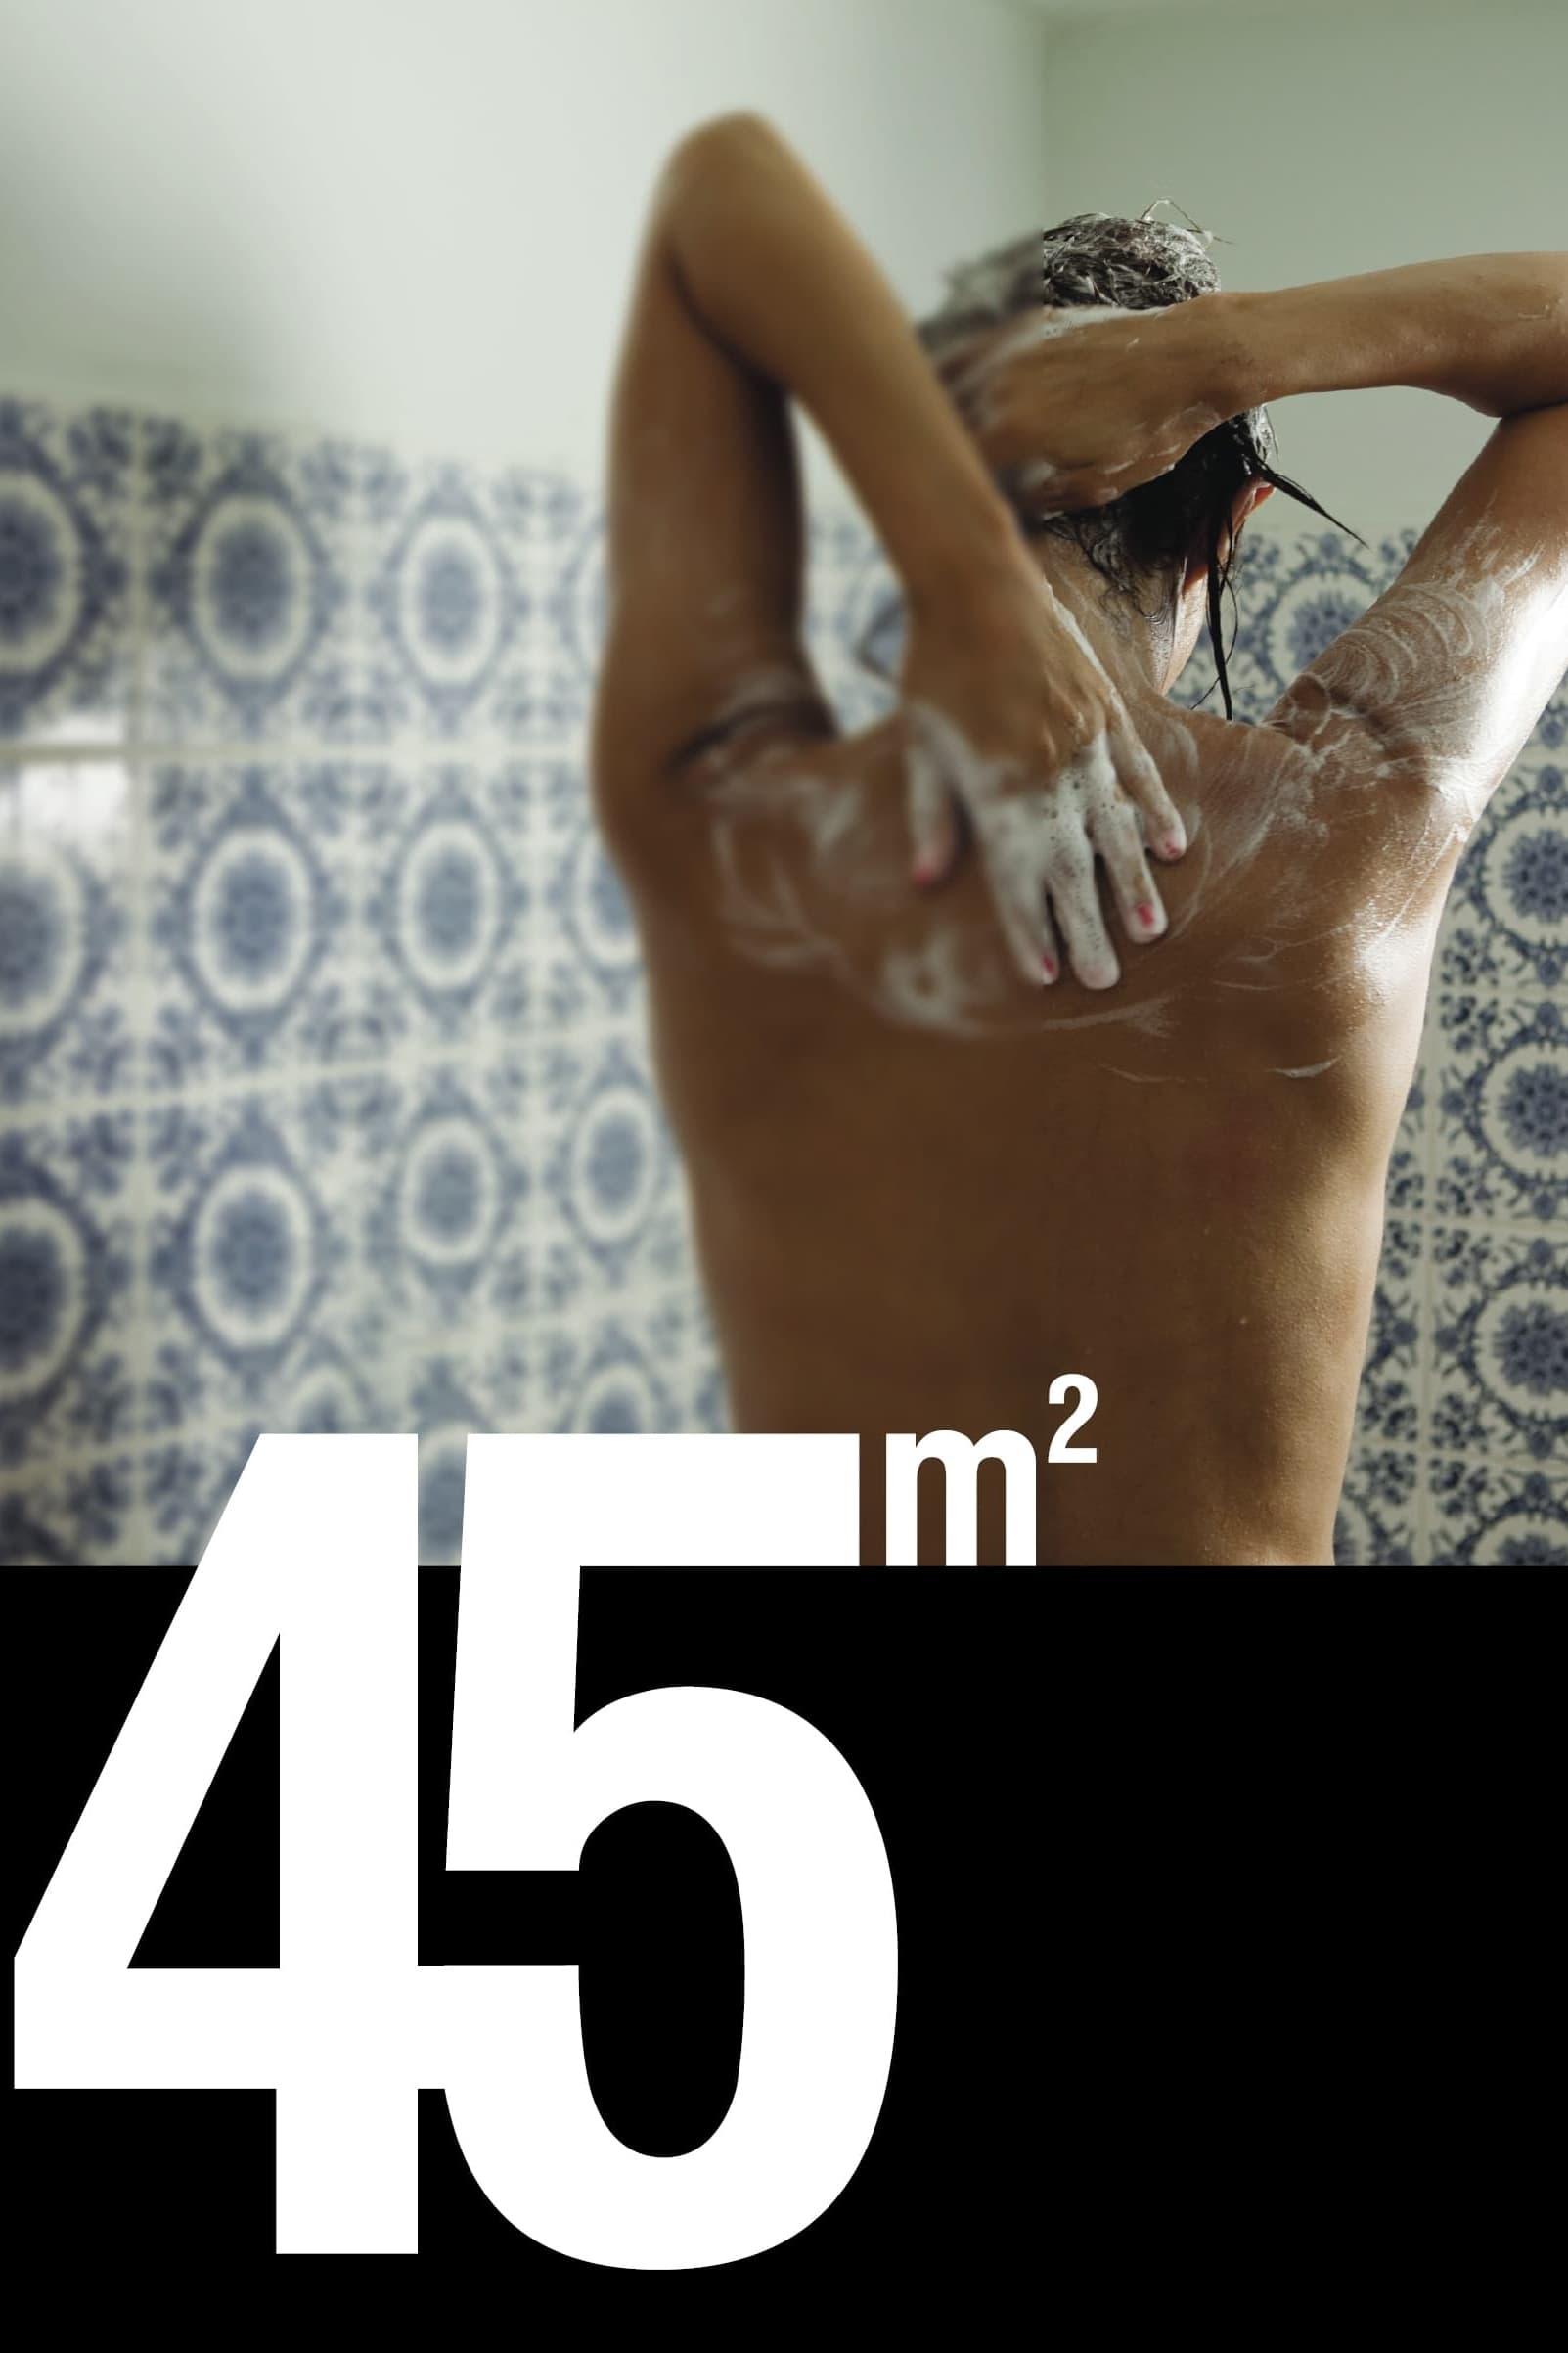 45m² poster